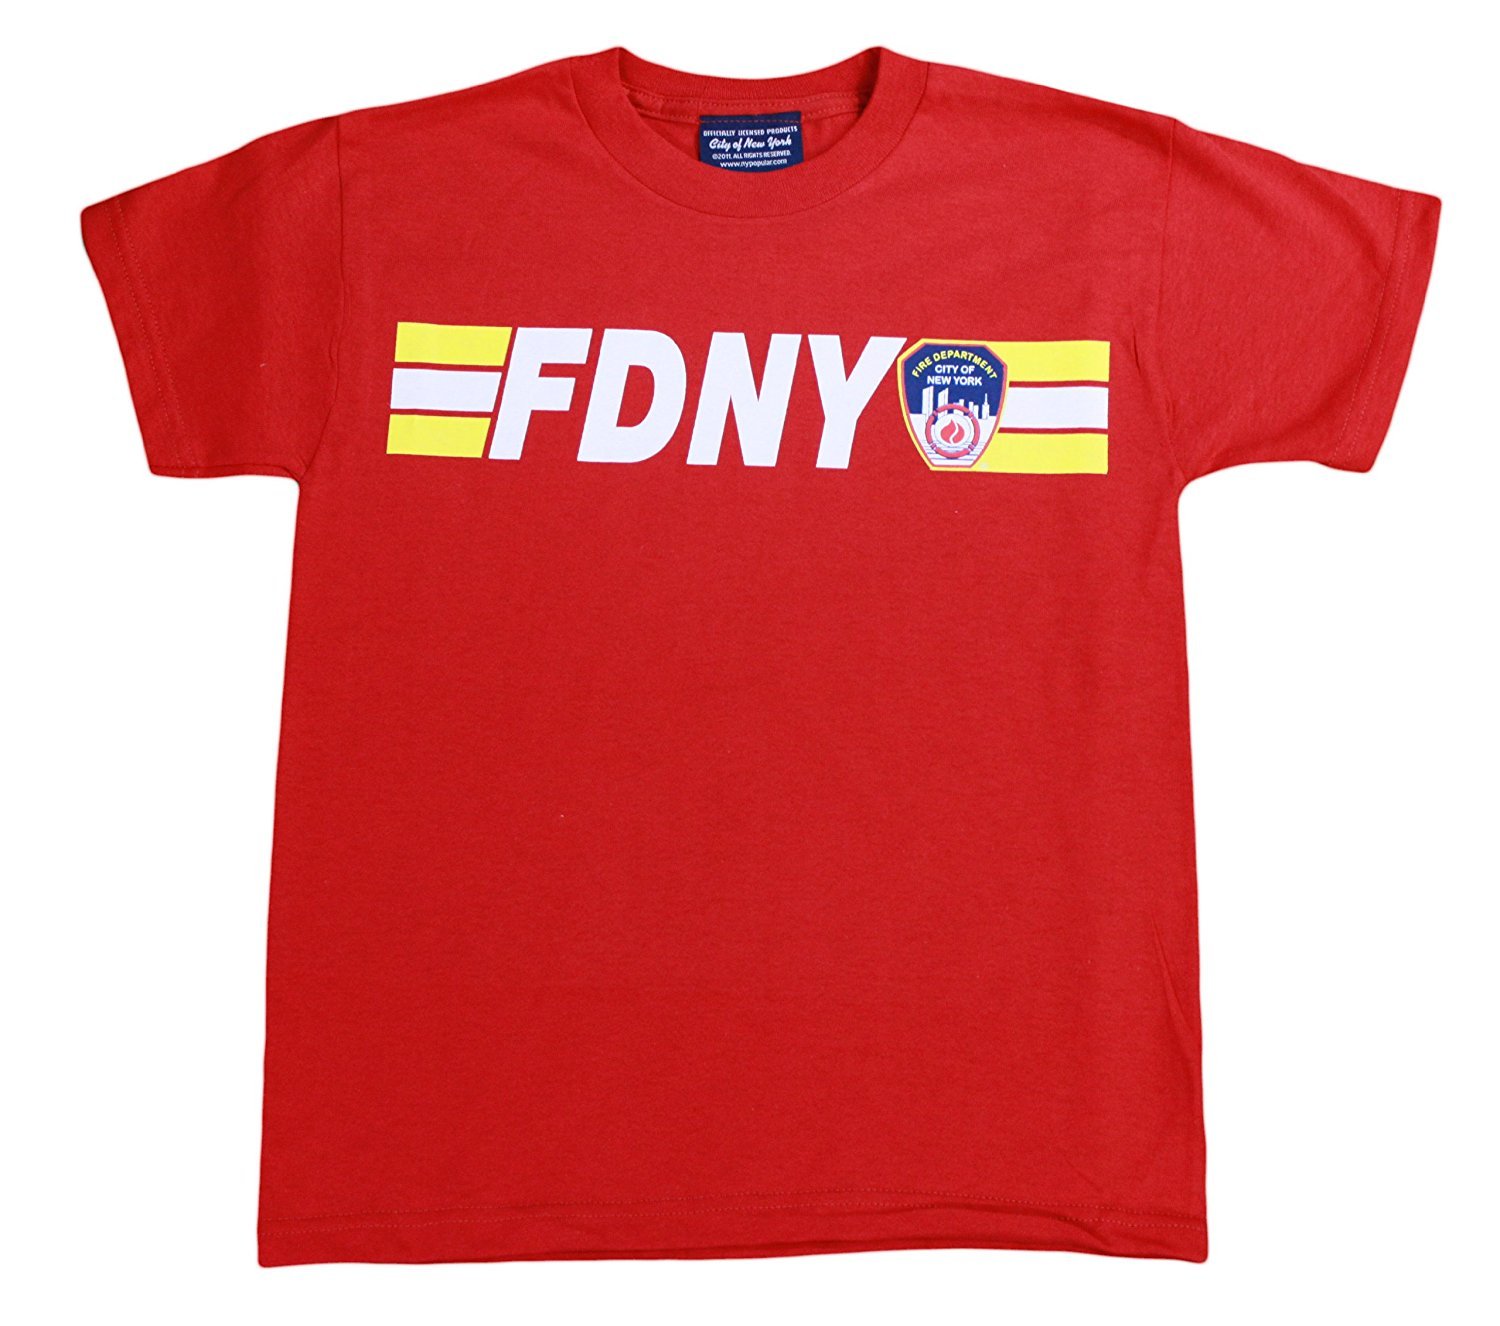 FDNY Kids Tee 200ft Back Officially Licensed (Youth, Red)